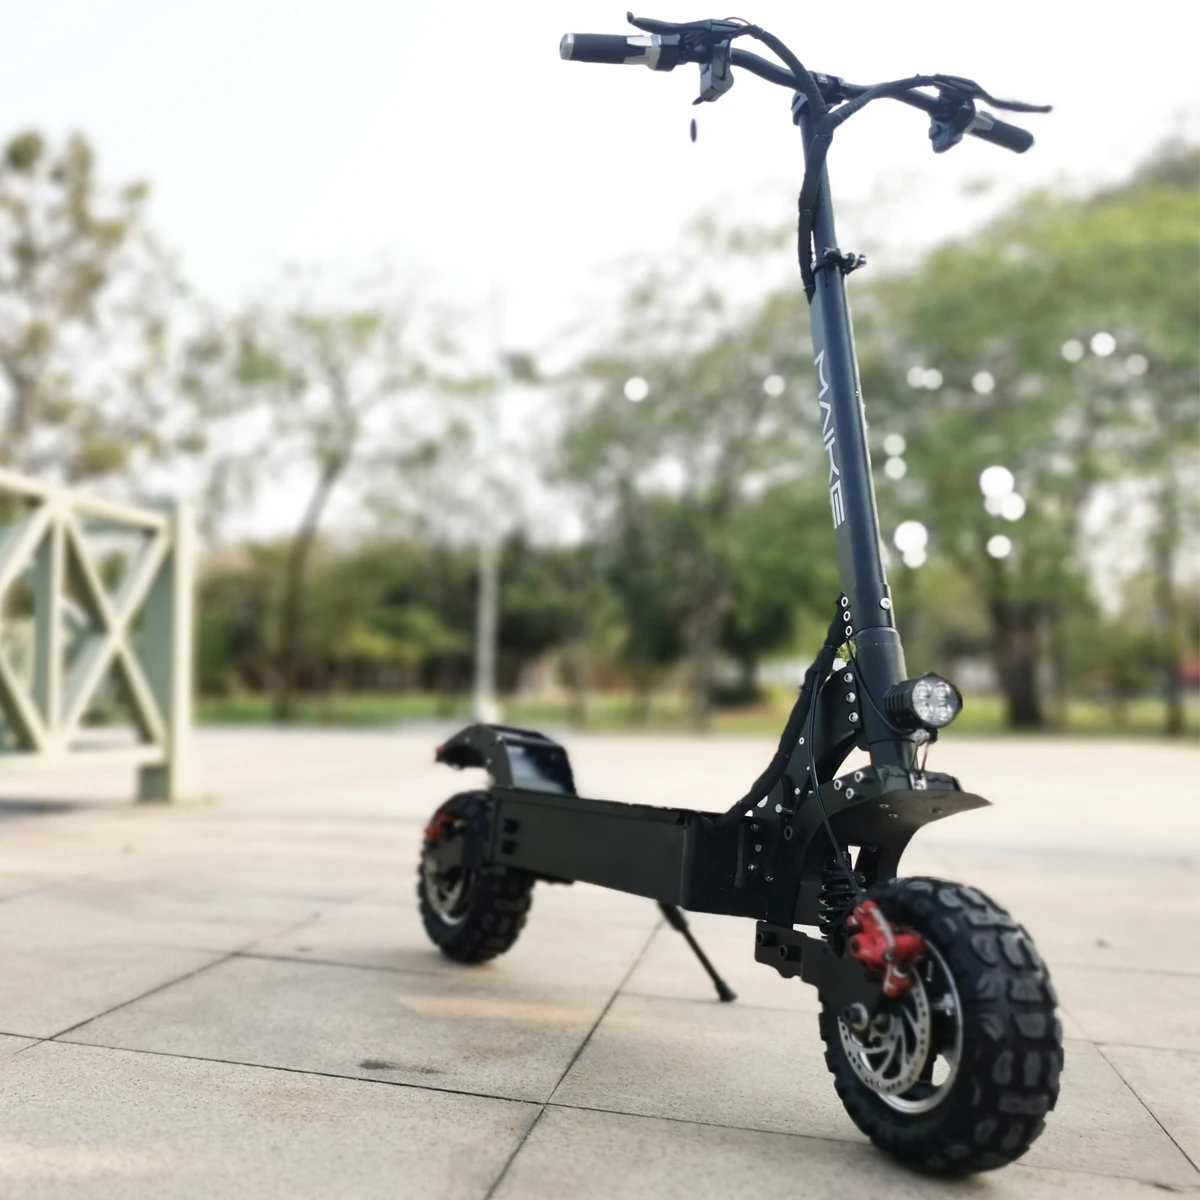 

High Quality Competitive Price maike mk4 1200w motor scooter 11 inch wide wheel high speed off road electric kick scooters